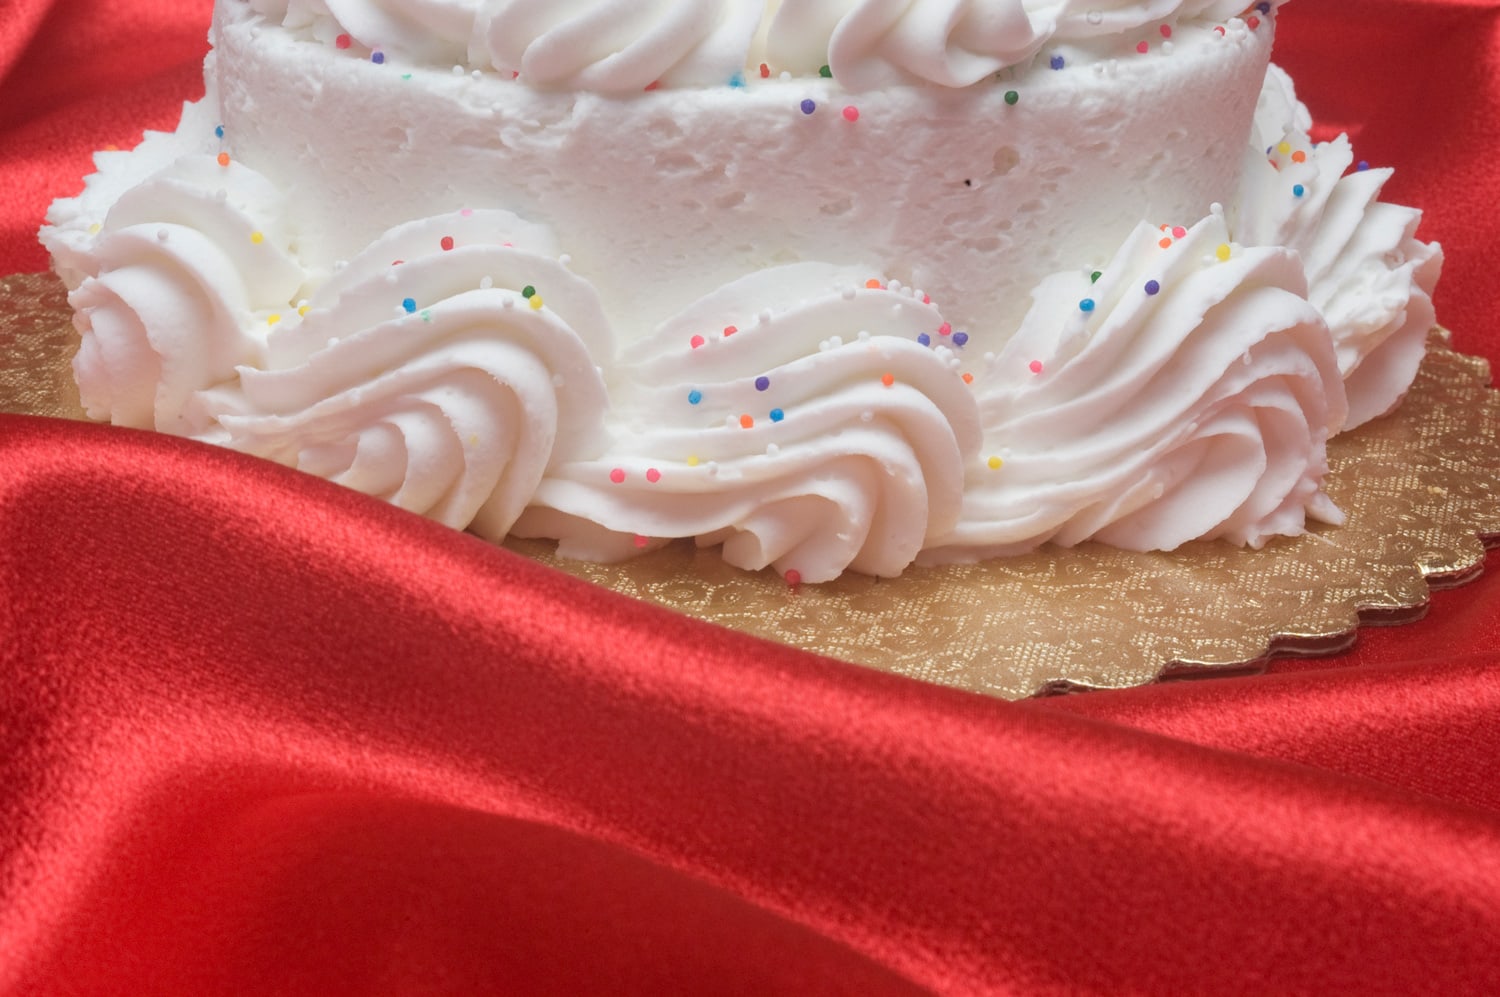 A frosted cake amongst waves of red satin cloth.